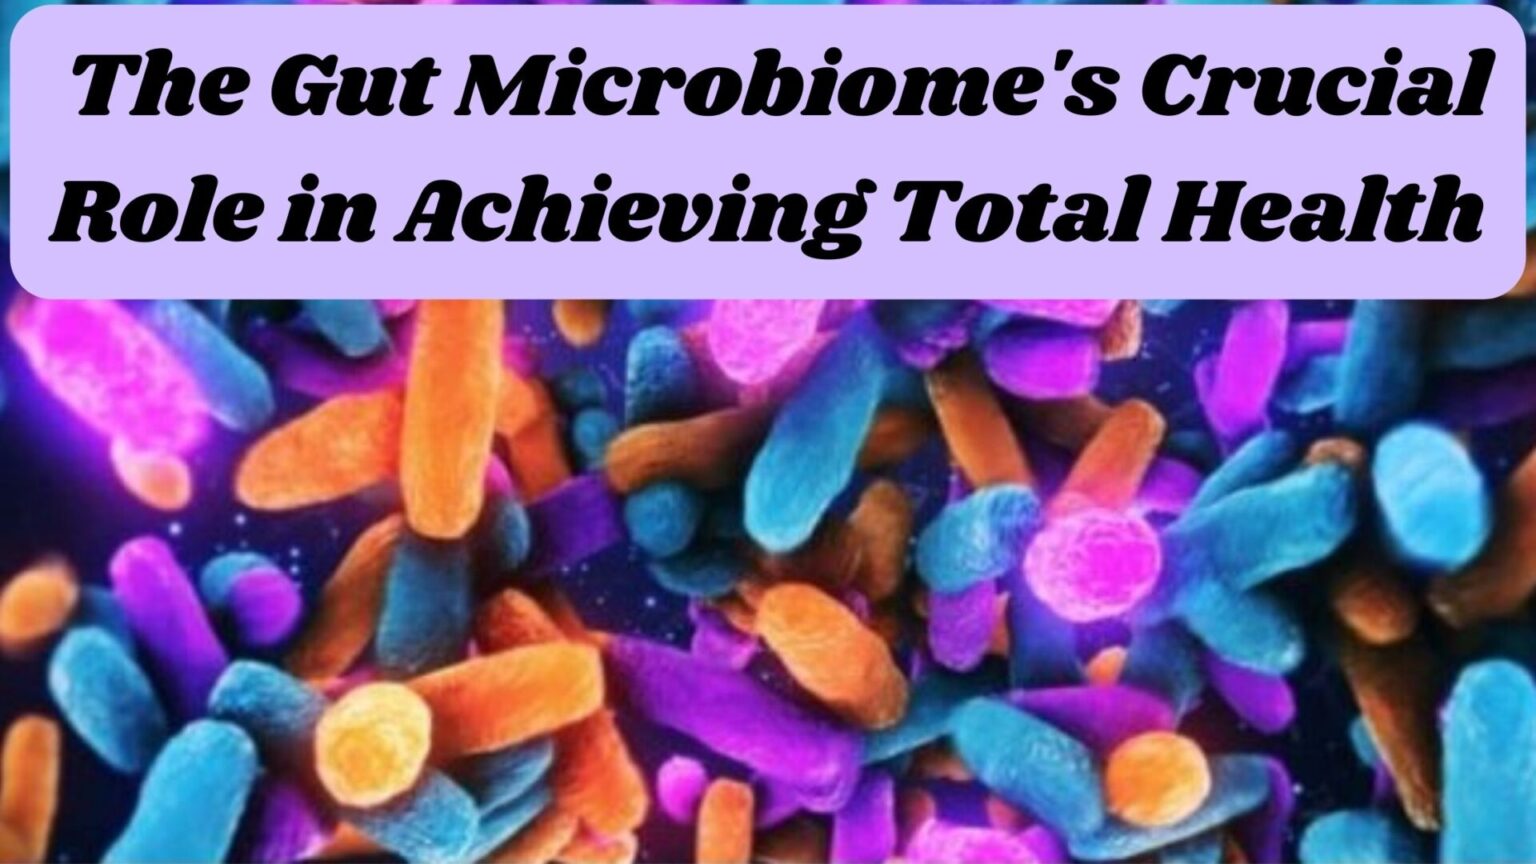 The Gut Microbiome's Crucial Role in Achieving Total Health